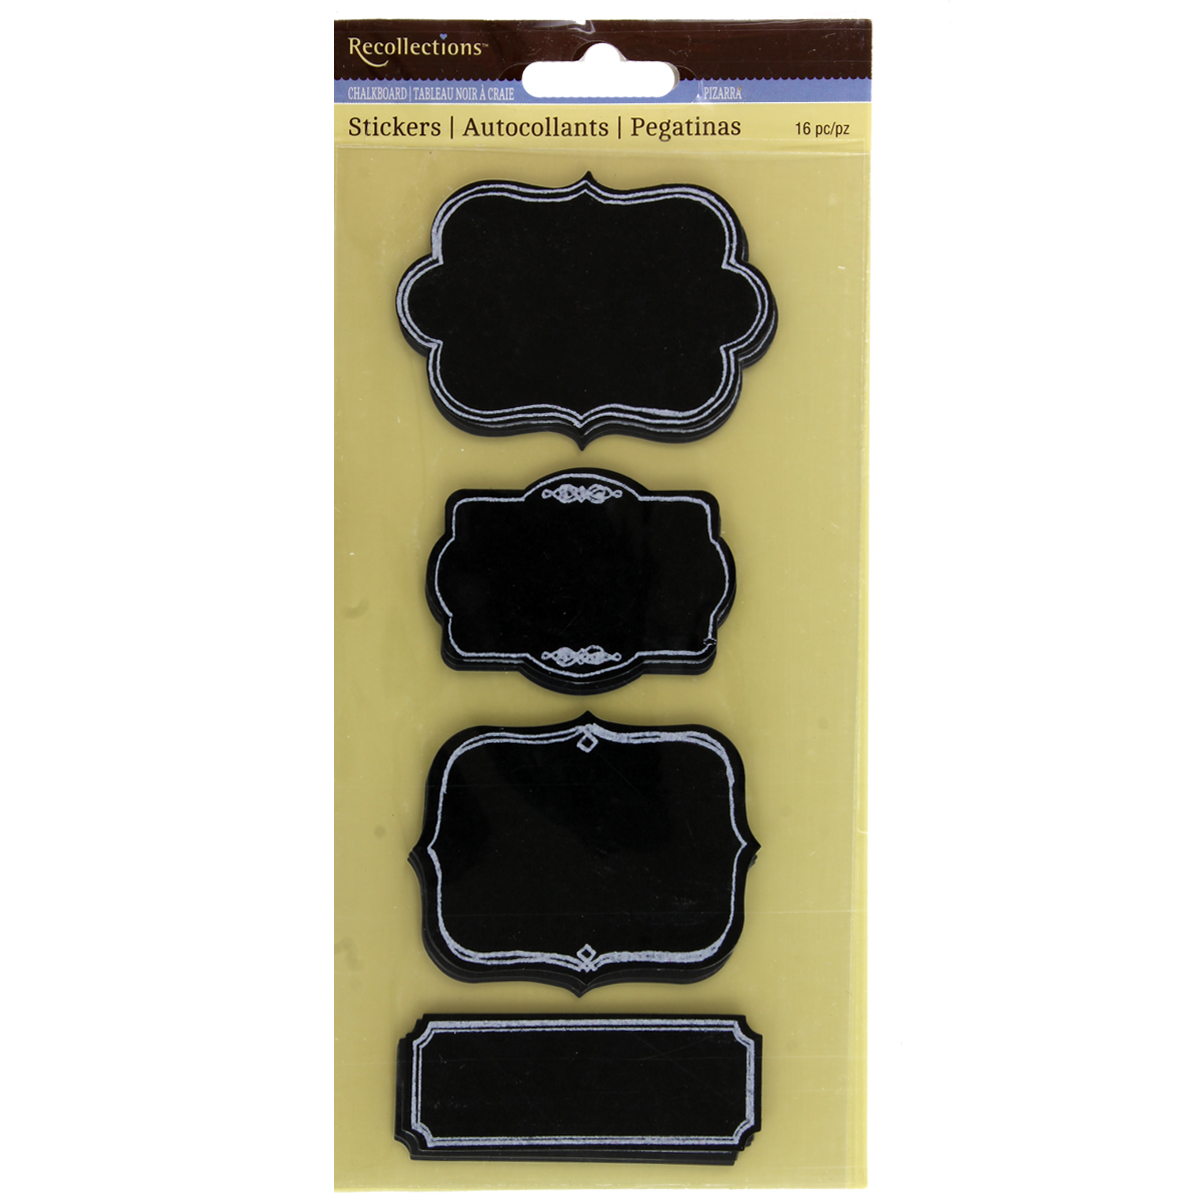 Recollections™ Chalkboard Label Stickers